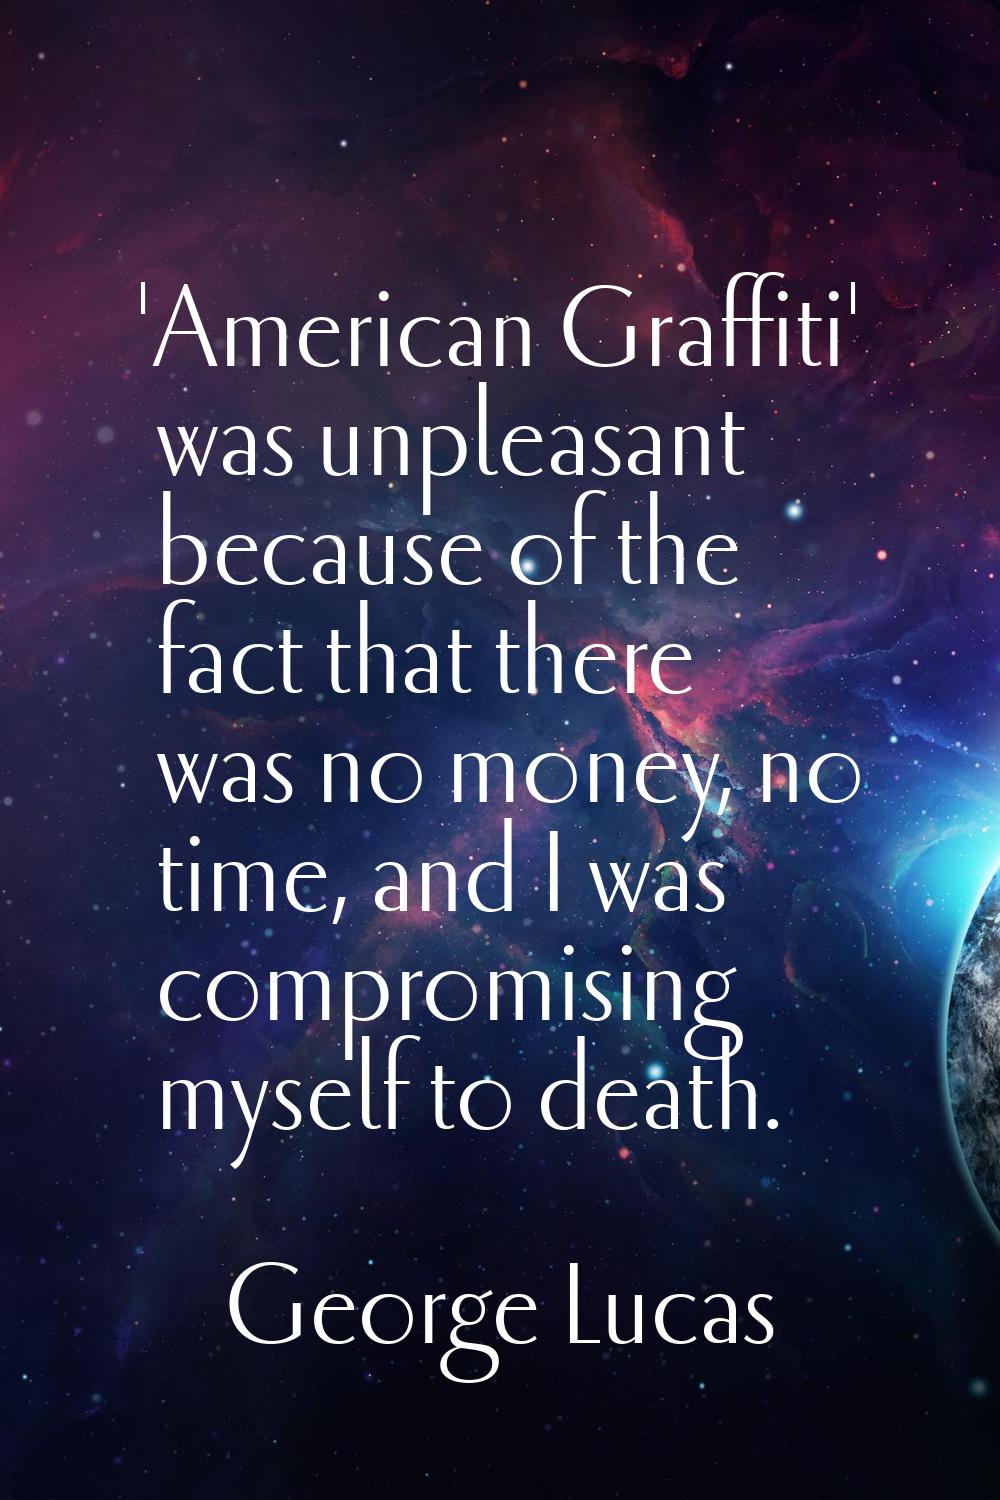 'American Graffiti' was unpleasant because of the fact that there was no money, no time, and I was 